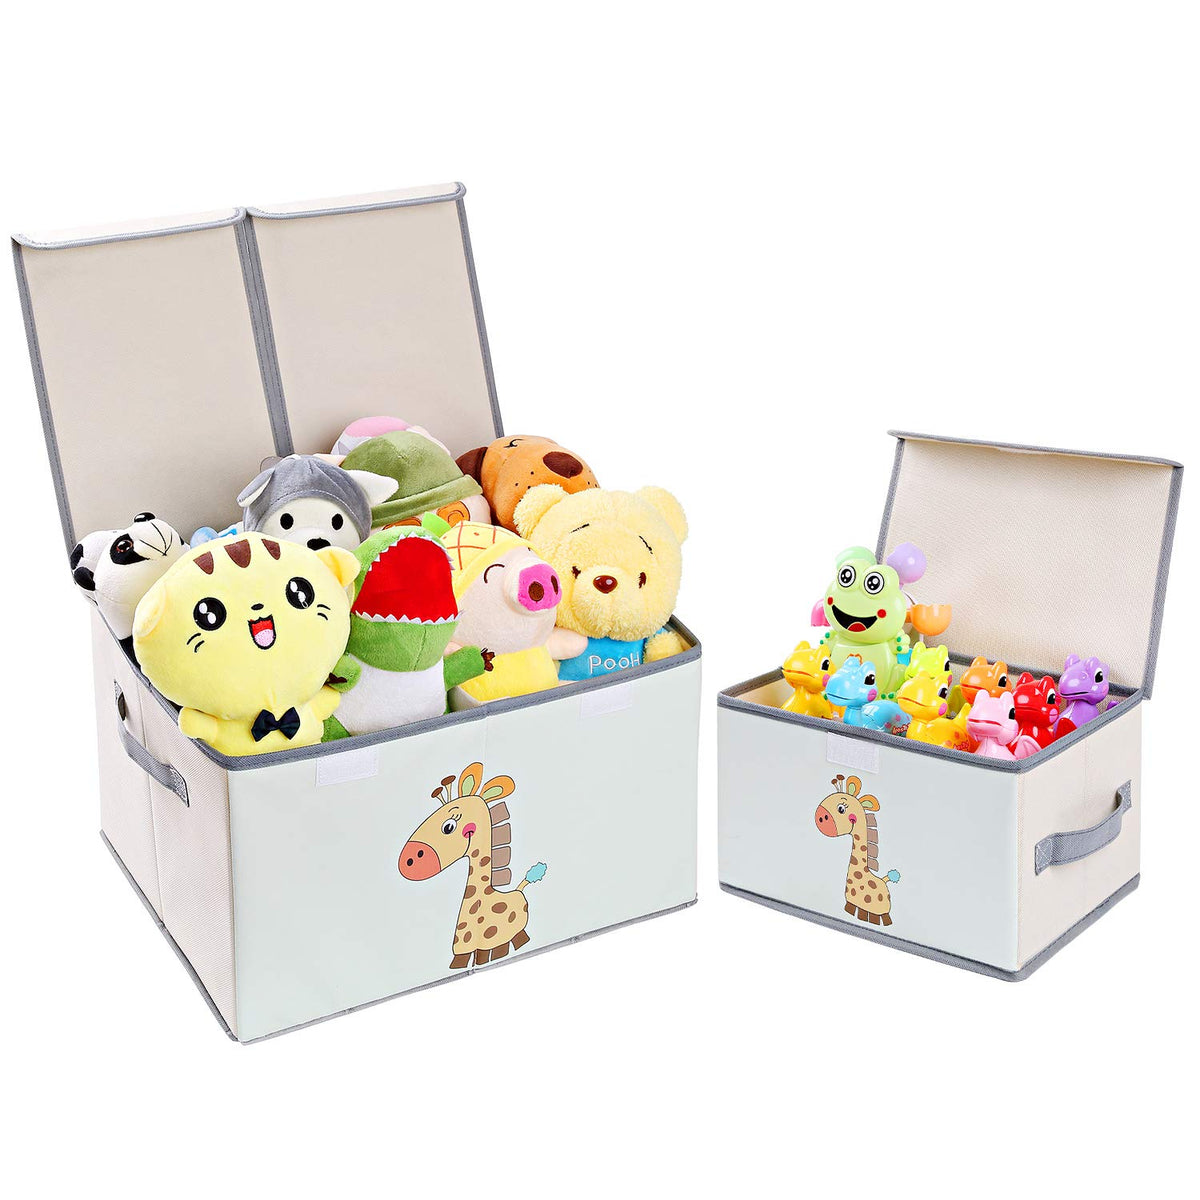 large toy storage box with lid